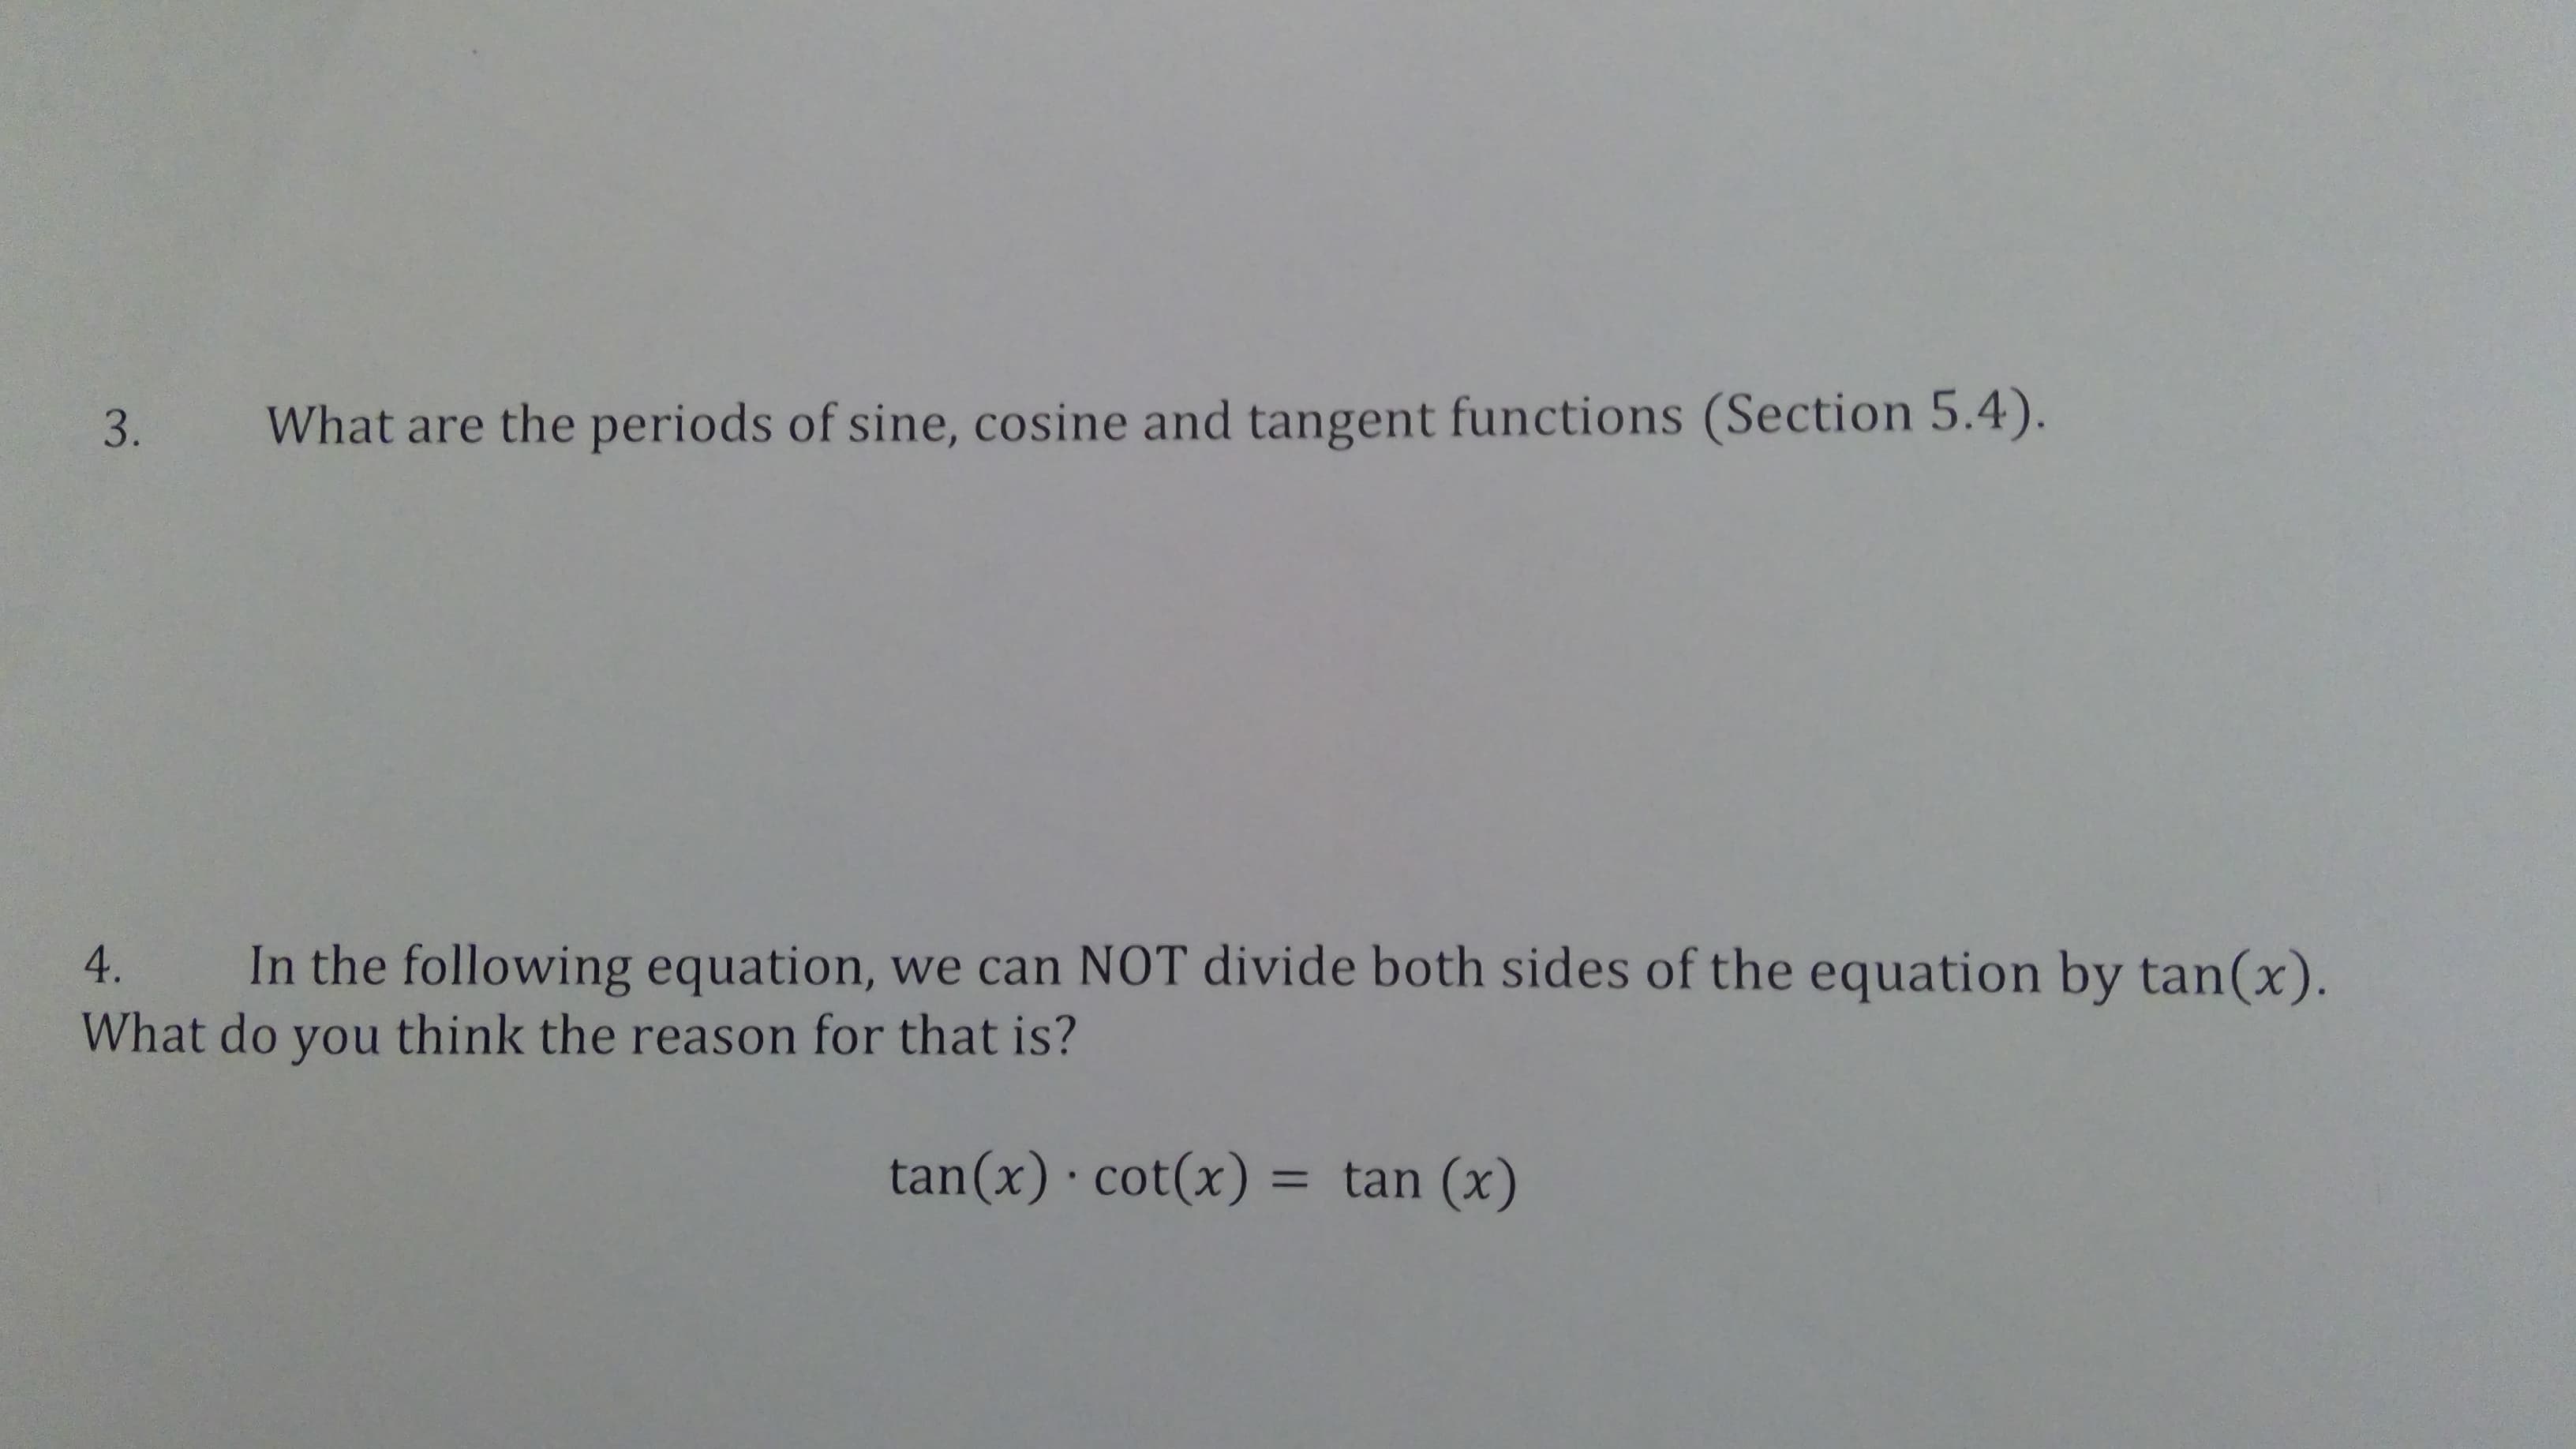 What are the periods of sine, cosine and tangent functions (Section 5.4).
In the following equation, we can NOT divide both sides of the equation by tan(x).
What do you think the reason for that is?
4.
tan(x) · cot(x) = tan (x)
3.
